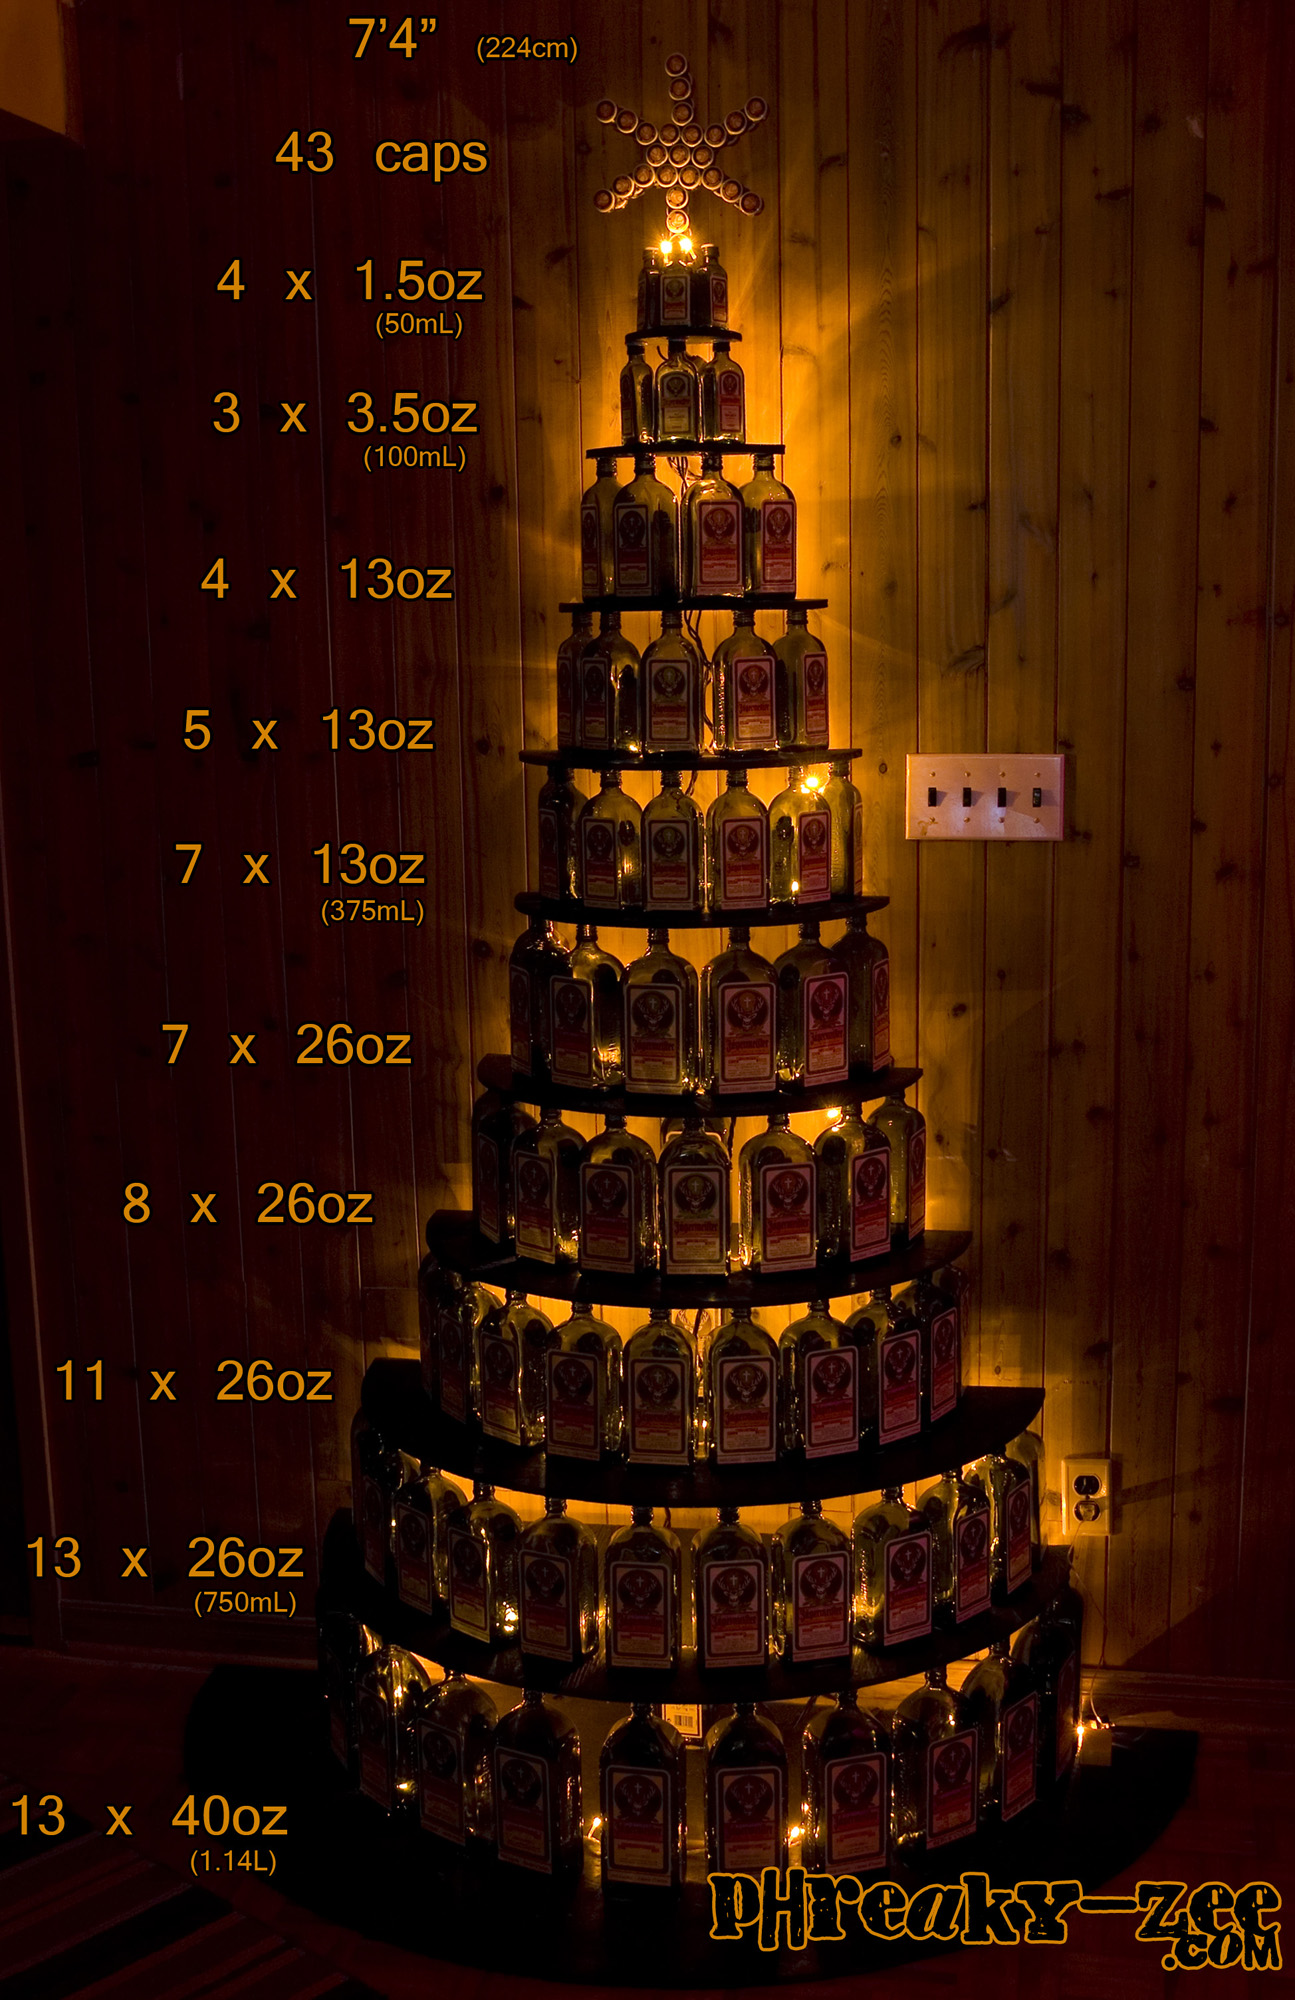 This is the tree that I built in 2009/2010.
It took a lot of dedication...and drinking!
www.PhreakyZee.com